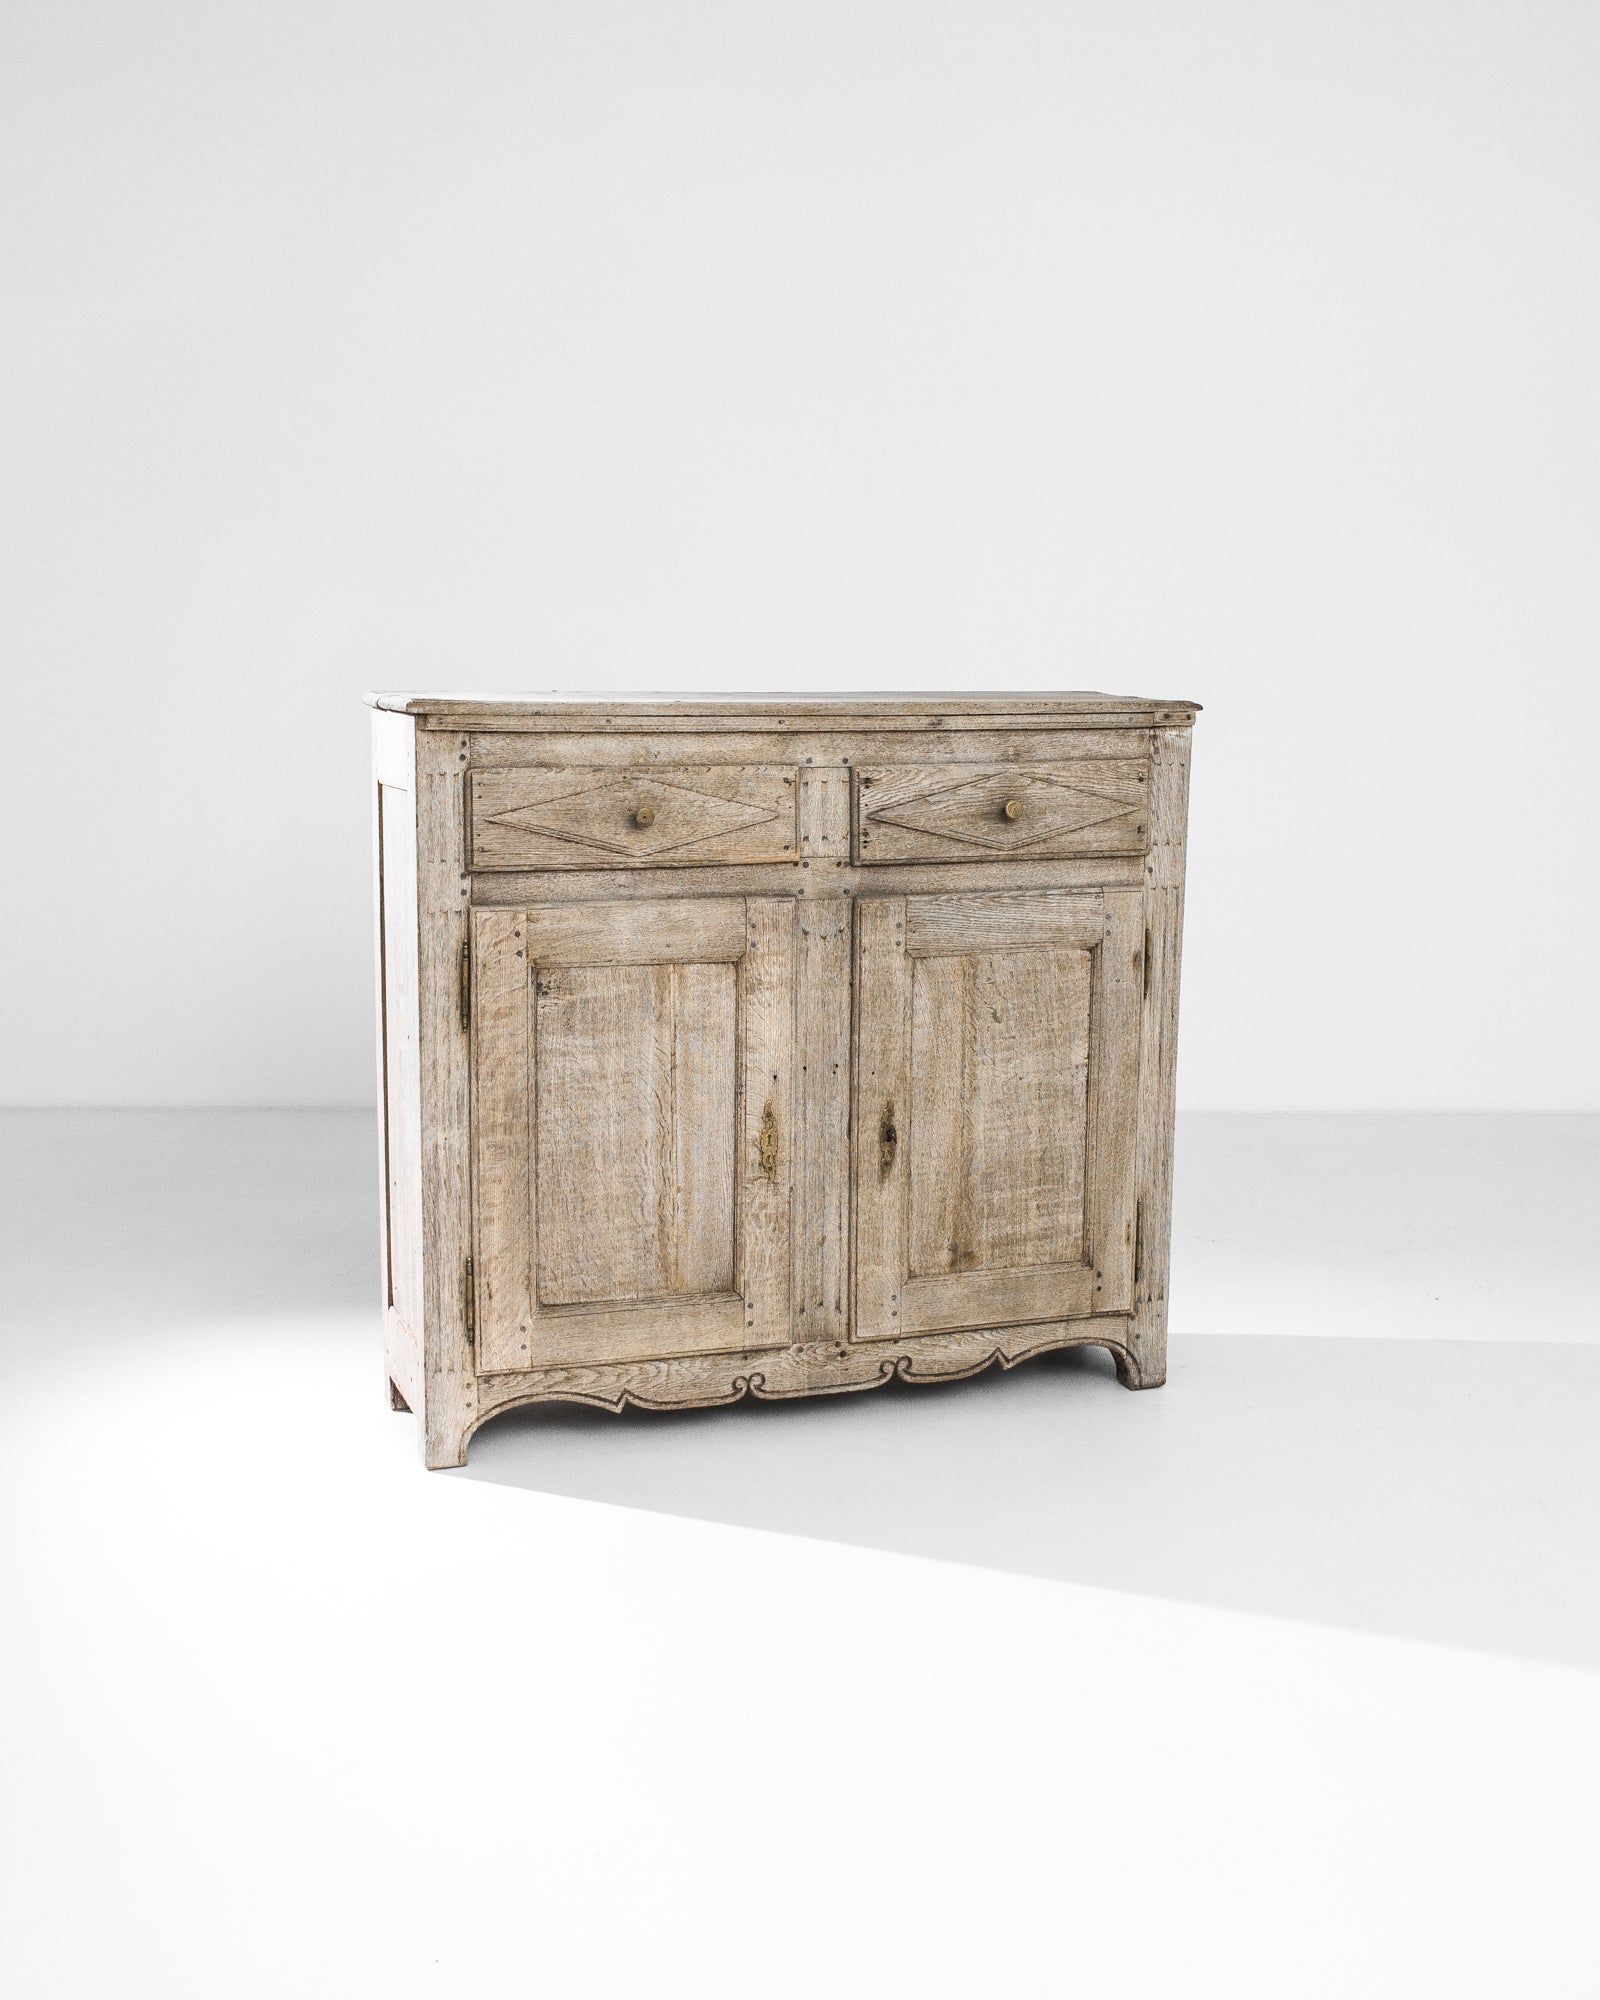 A graceful oak buffet from 1860s France. The almond tone of the oak is embellished by a gentle sanding process, revealing the natural patterns of the wood. The upright profile is contrasted by a smoothly carved scalloped apron. The diamond shapes